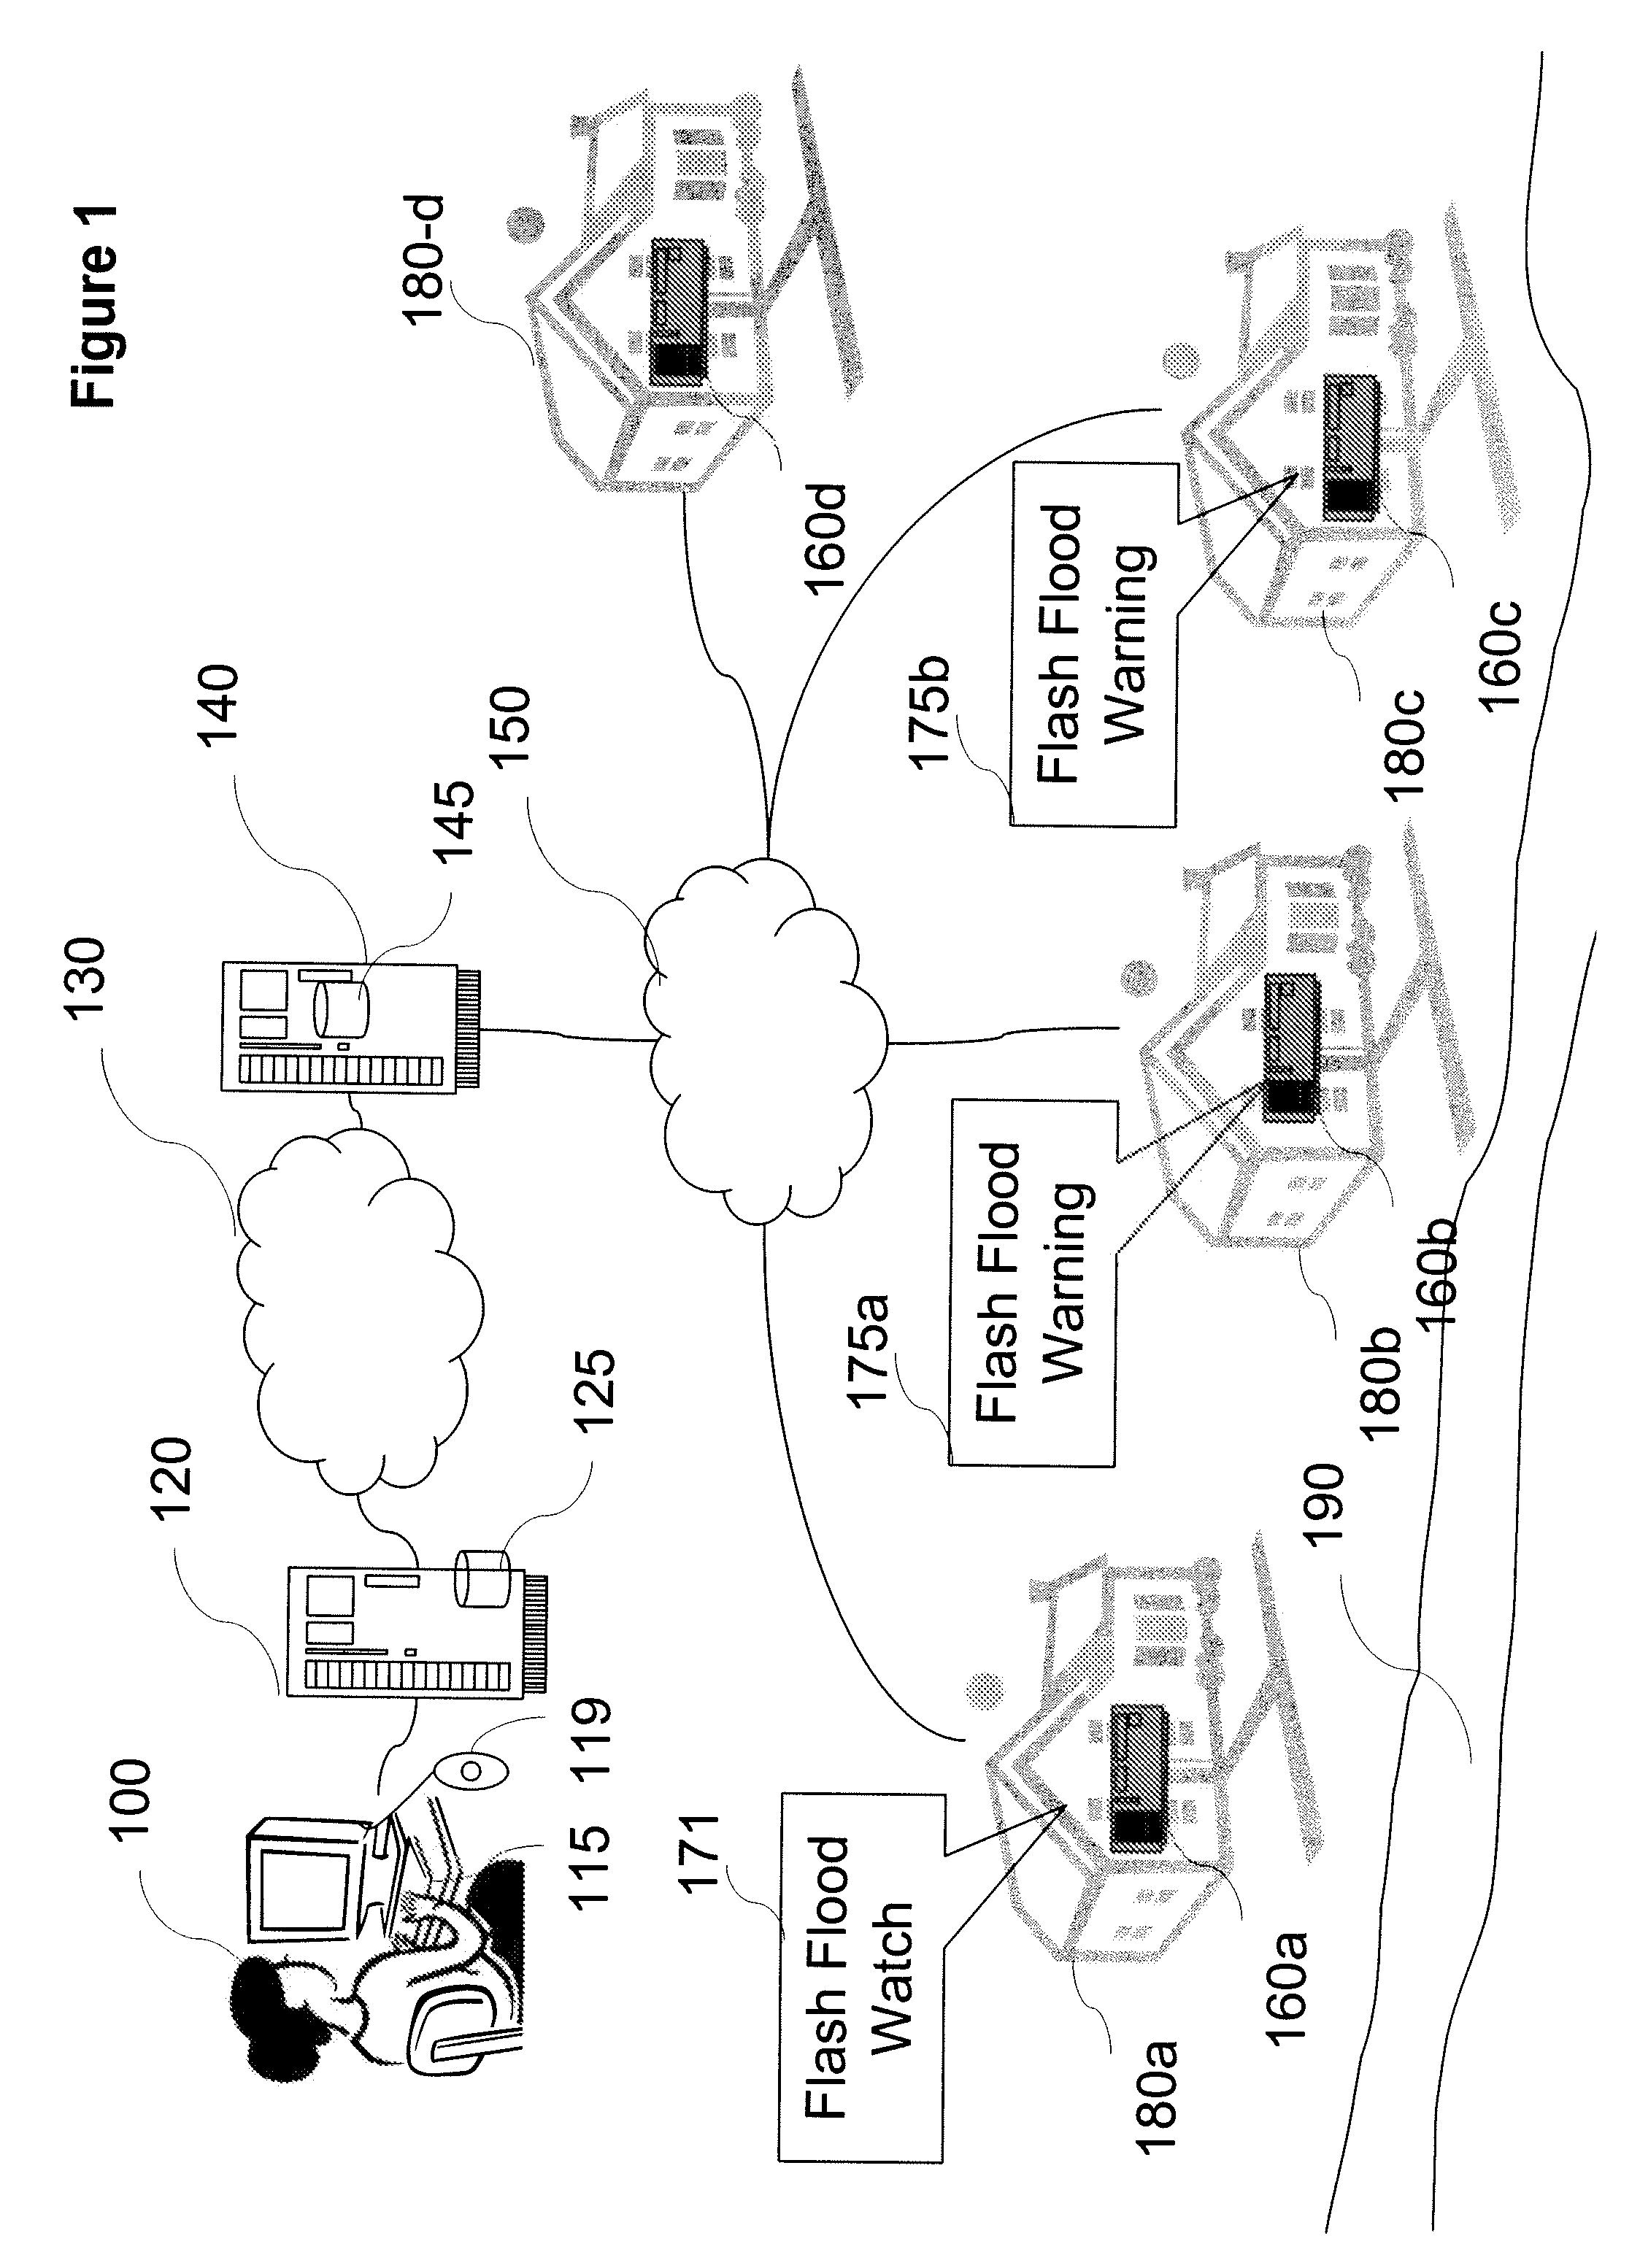 Method and apparatus for notification of disasters and emergencies